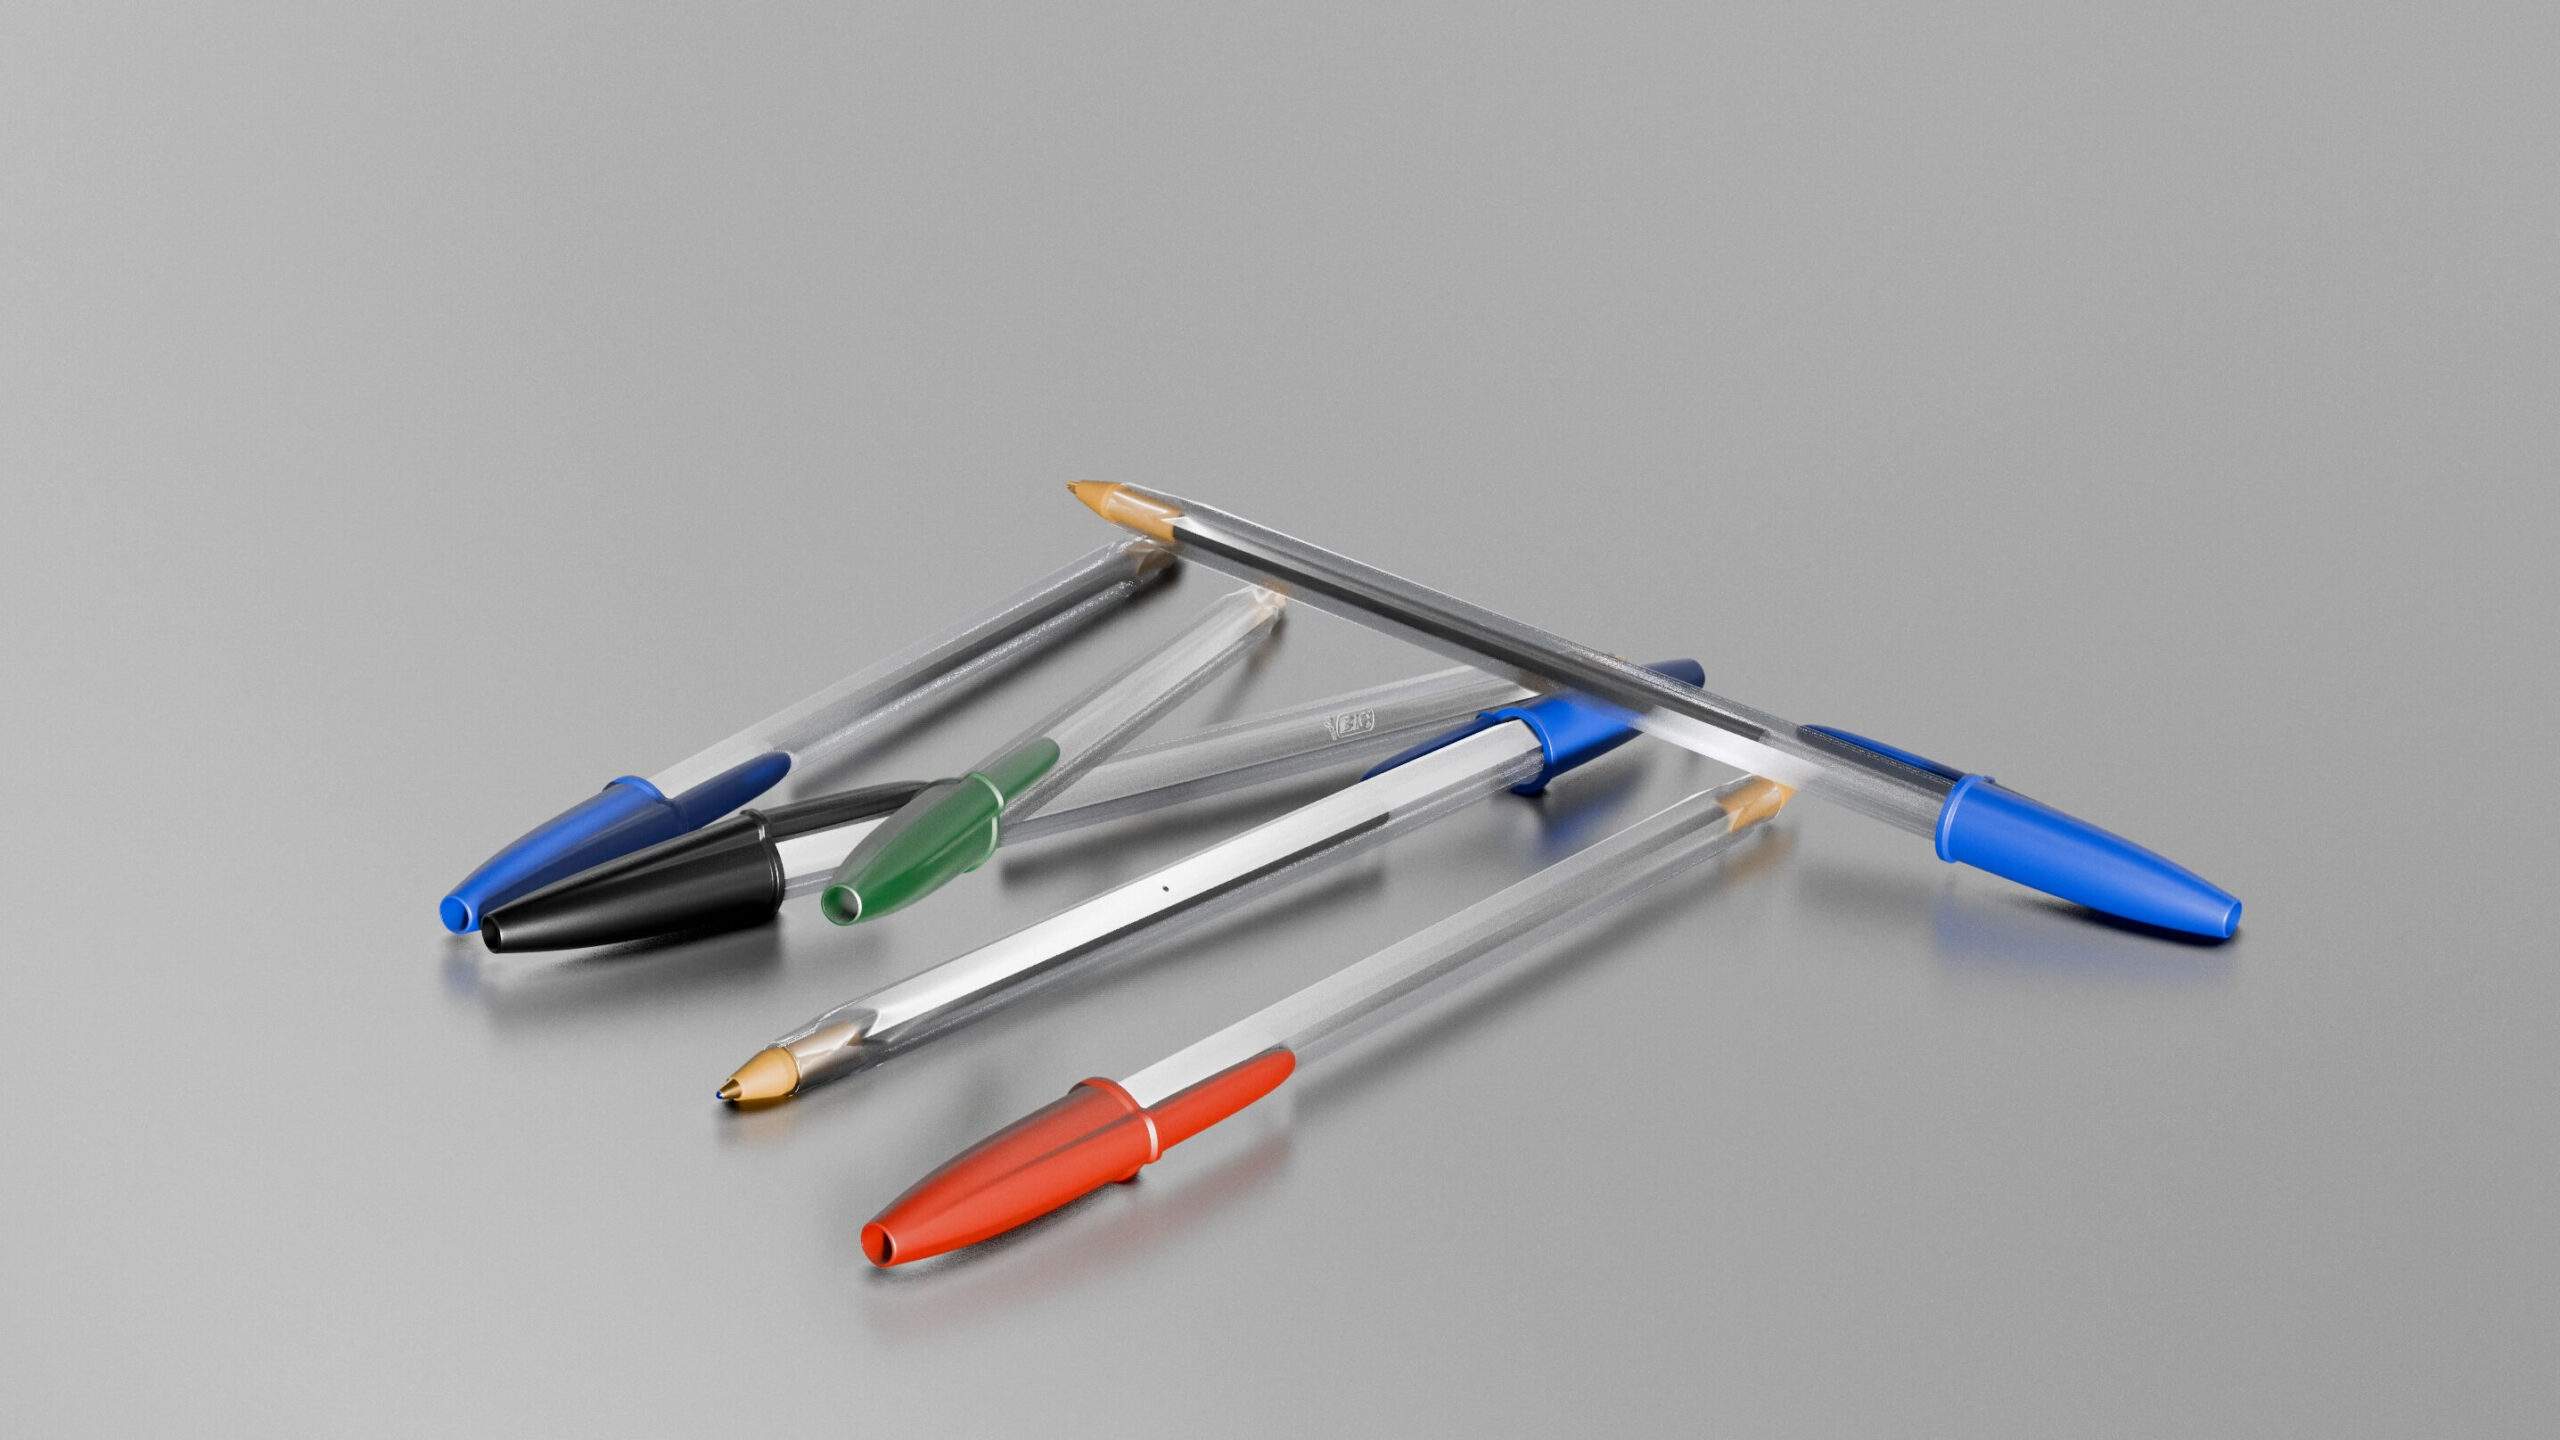 Image showing a pile of BIC Cristal pens in all colors blue, black, red and green